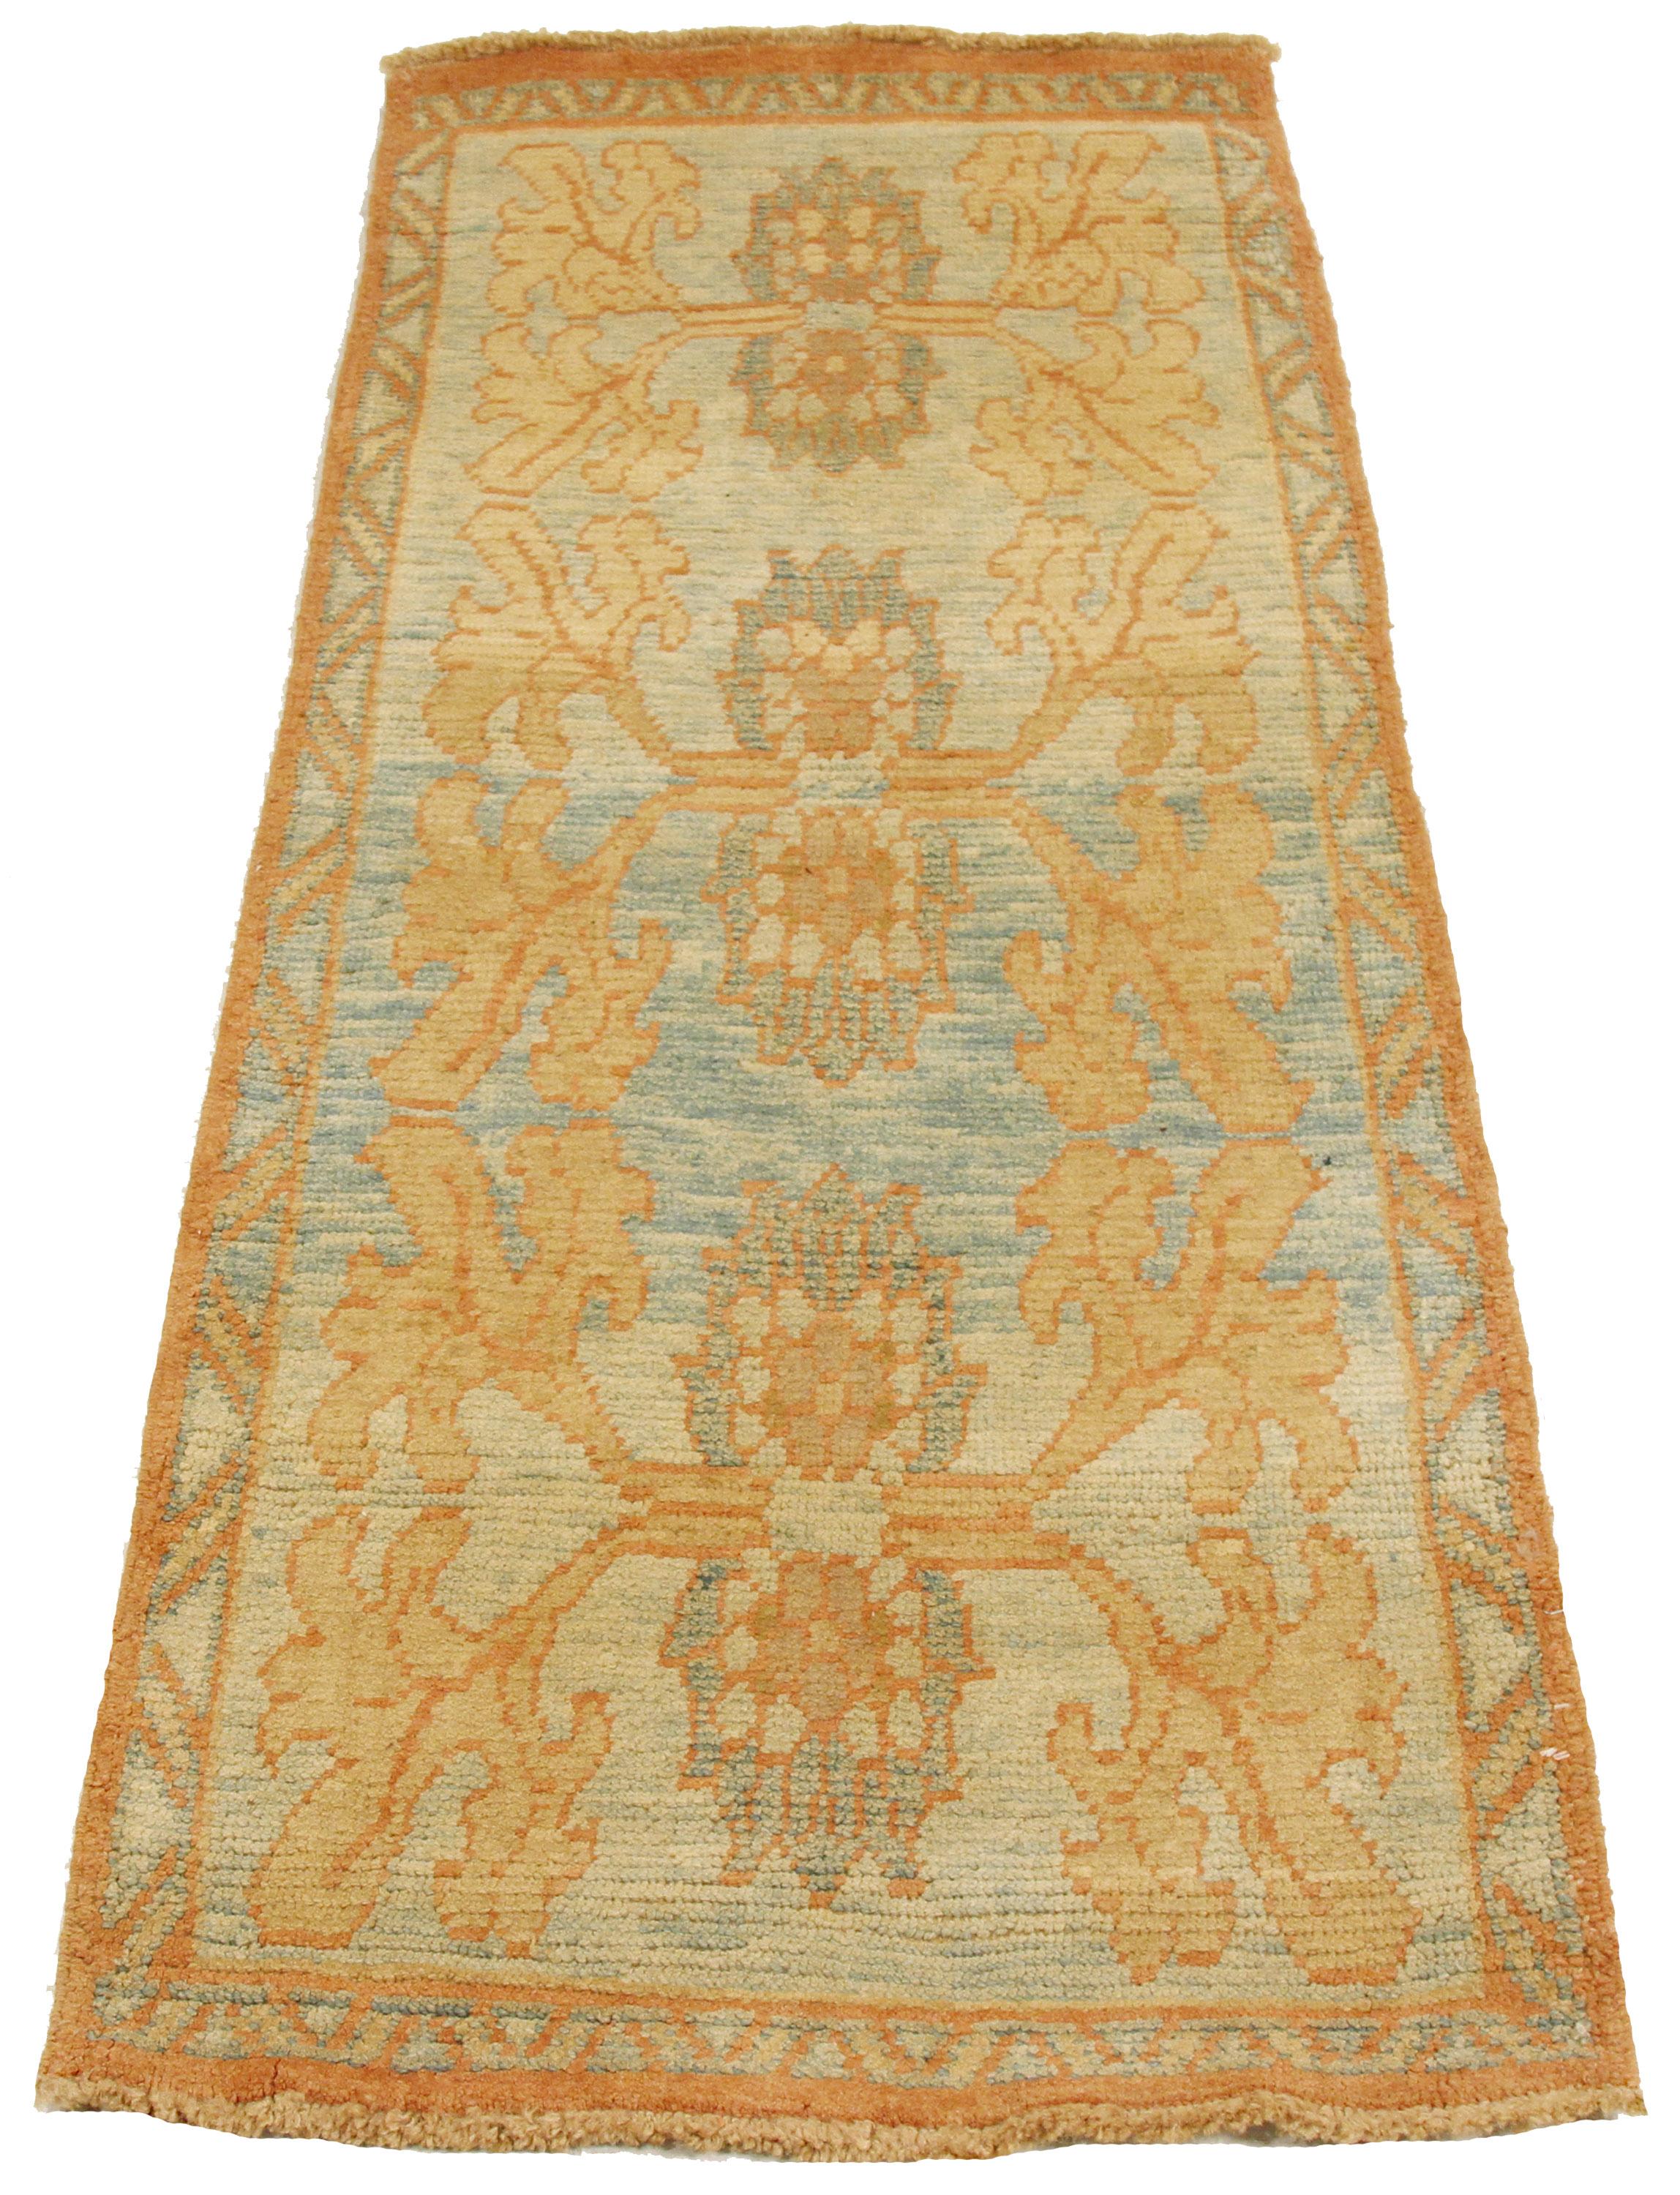 Contemporary handmade Turkish rug from high-quality sheep’s wool and colored with eco-friendly vegetable dyes that are proven safe for humans and pets alike. It’s a Donegal design showcasing a blue field with beautiful ivory and brown botanical